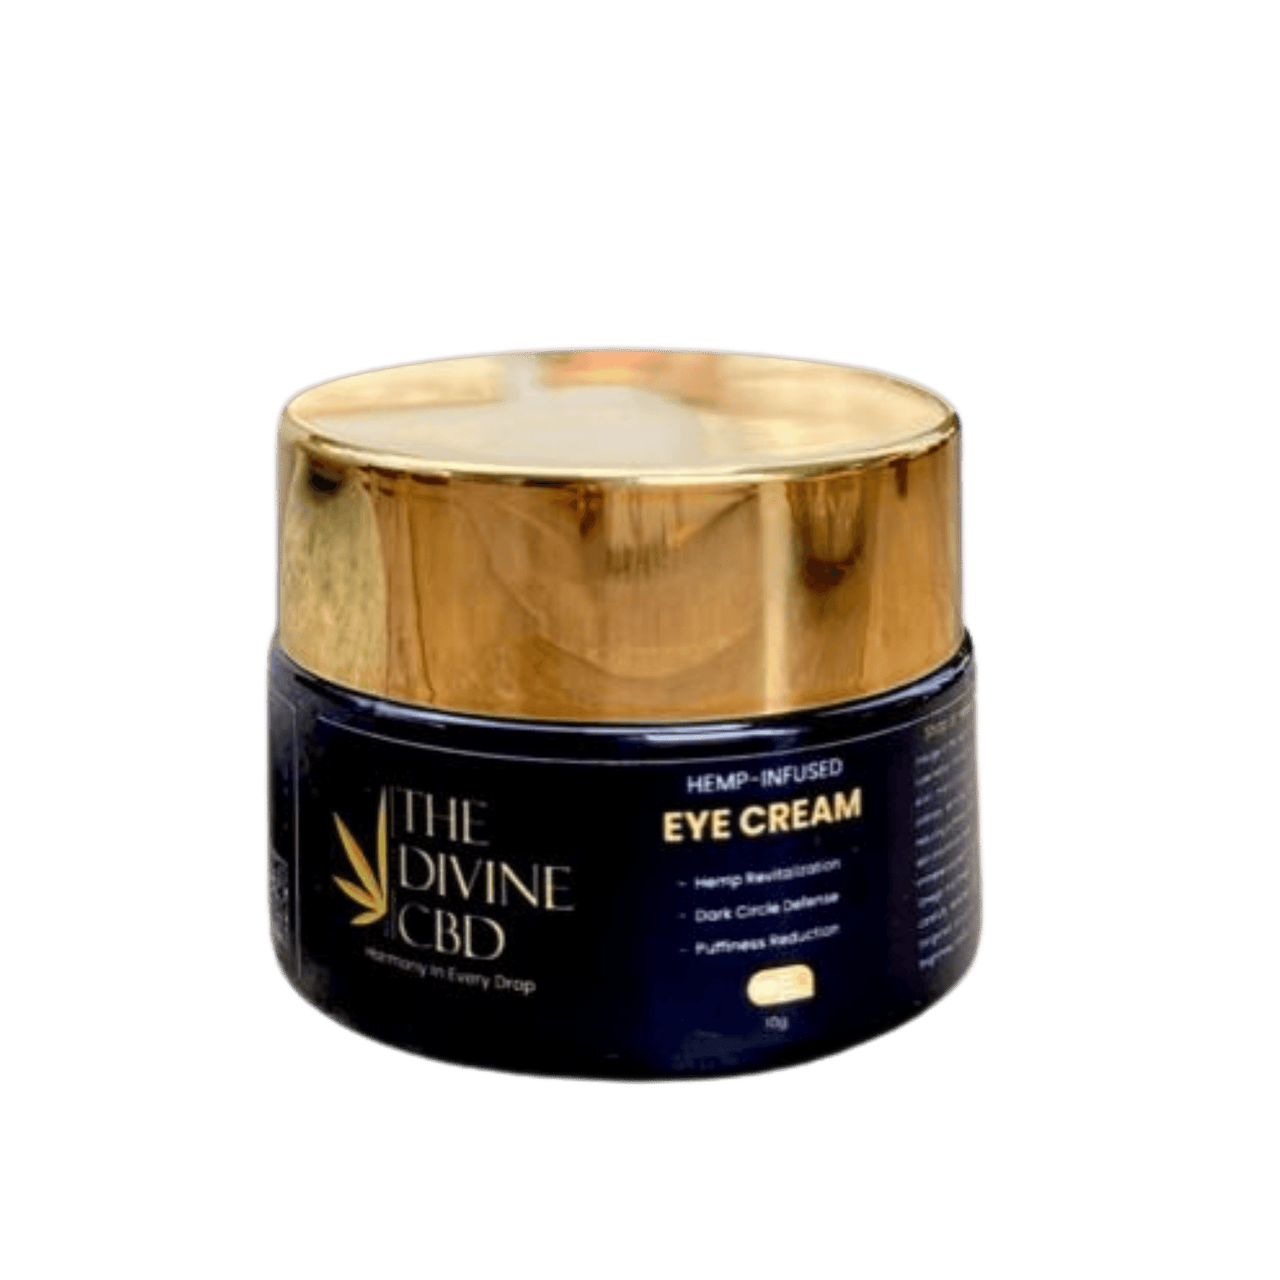 The Divine CBD- Luxe Hemp-Infused Eye Cream | Elegance for Your Expressive Eyes